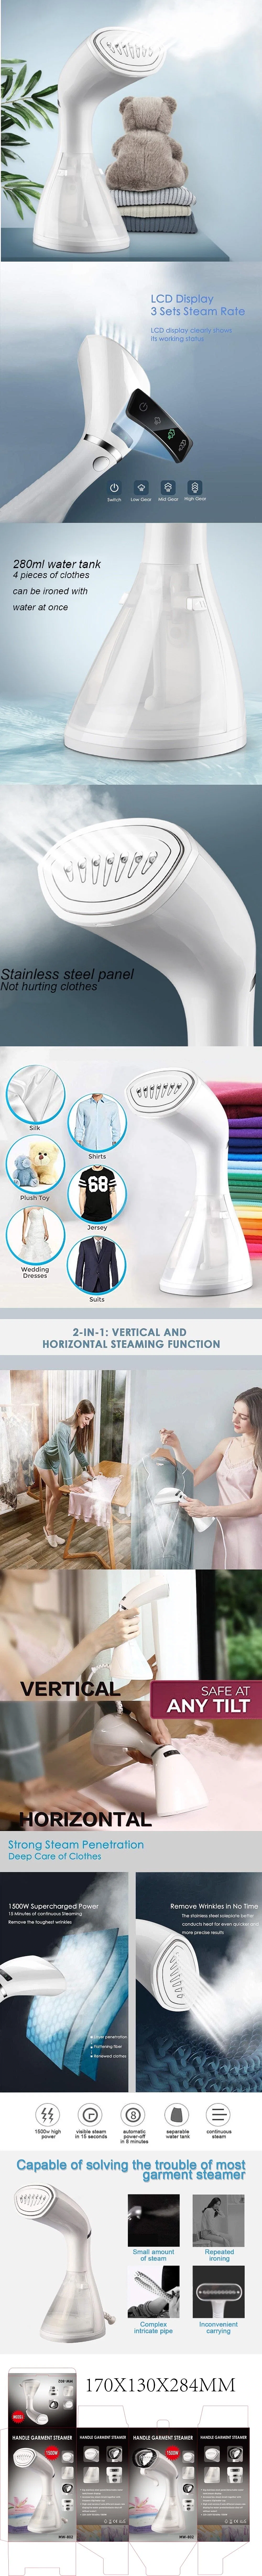 Family-Style Convenient Garment Steamer Easy to Carry Standing Garment Steamer 2021 New Steam Iron Clothes